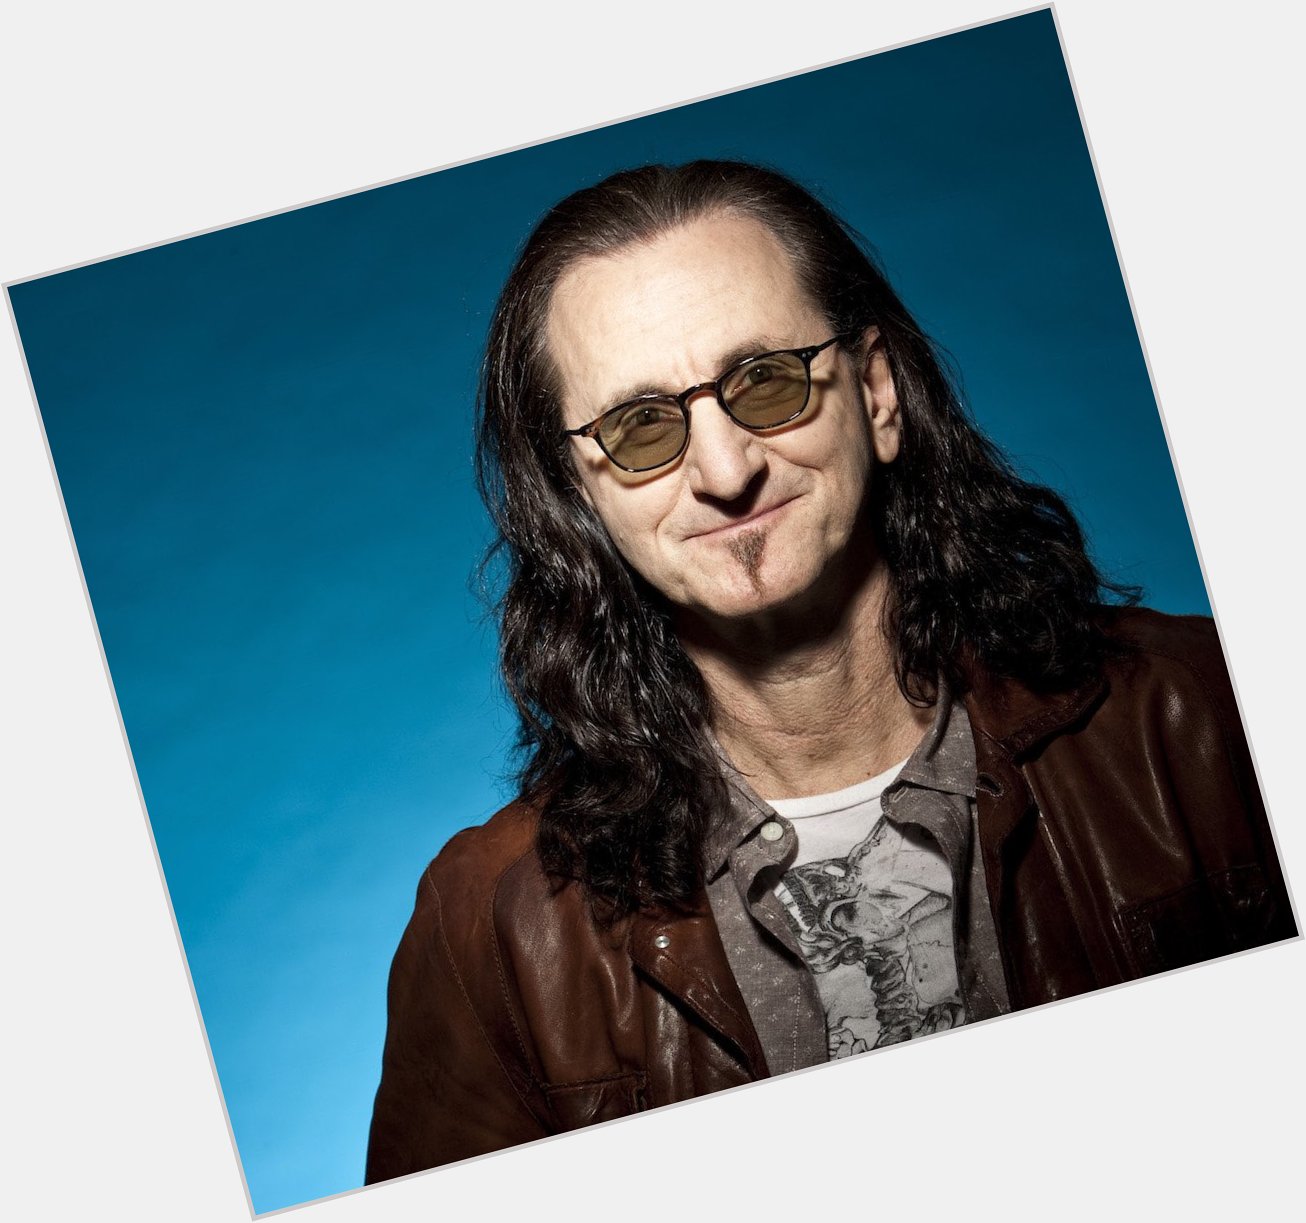 Happy 69th birthday (nice!) to God s gift to bass playing, Geddy Lee of Rush. 